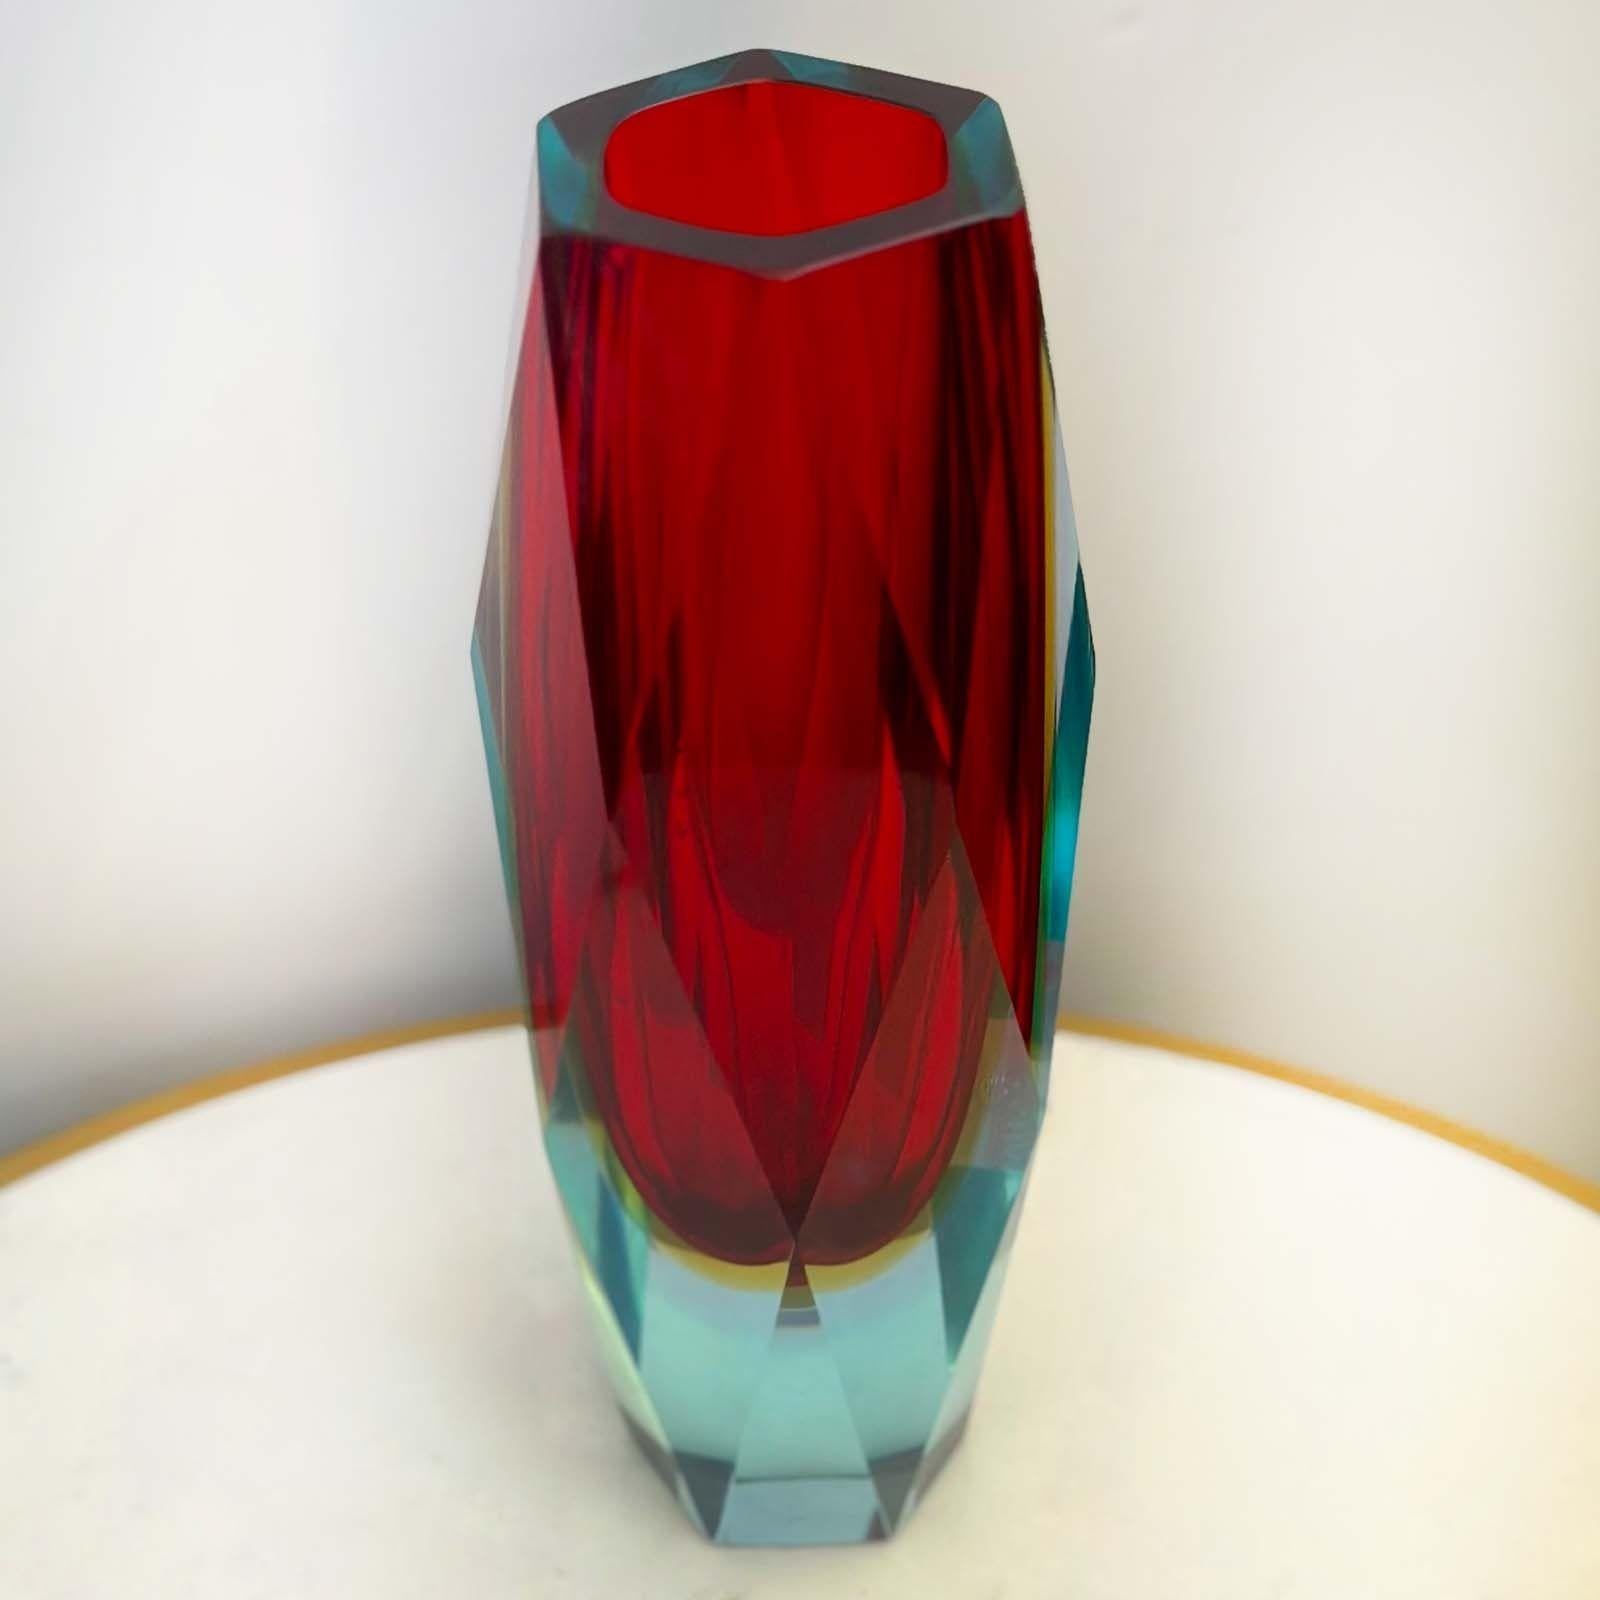 Single red, blue and yellow Murano glass vase with unique geometric shape. Made in Italy, c. 1960's.
Dimensions:
10.25